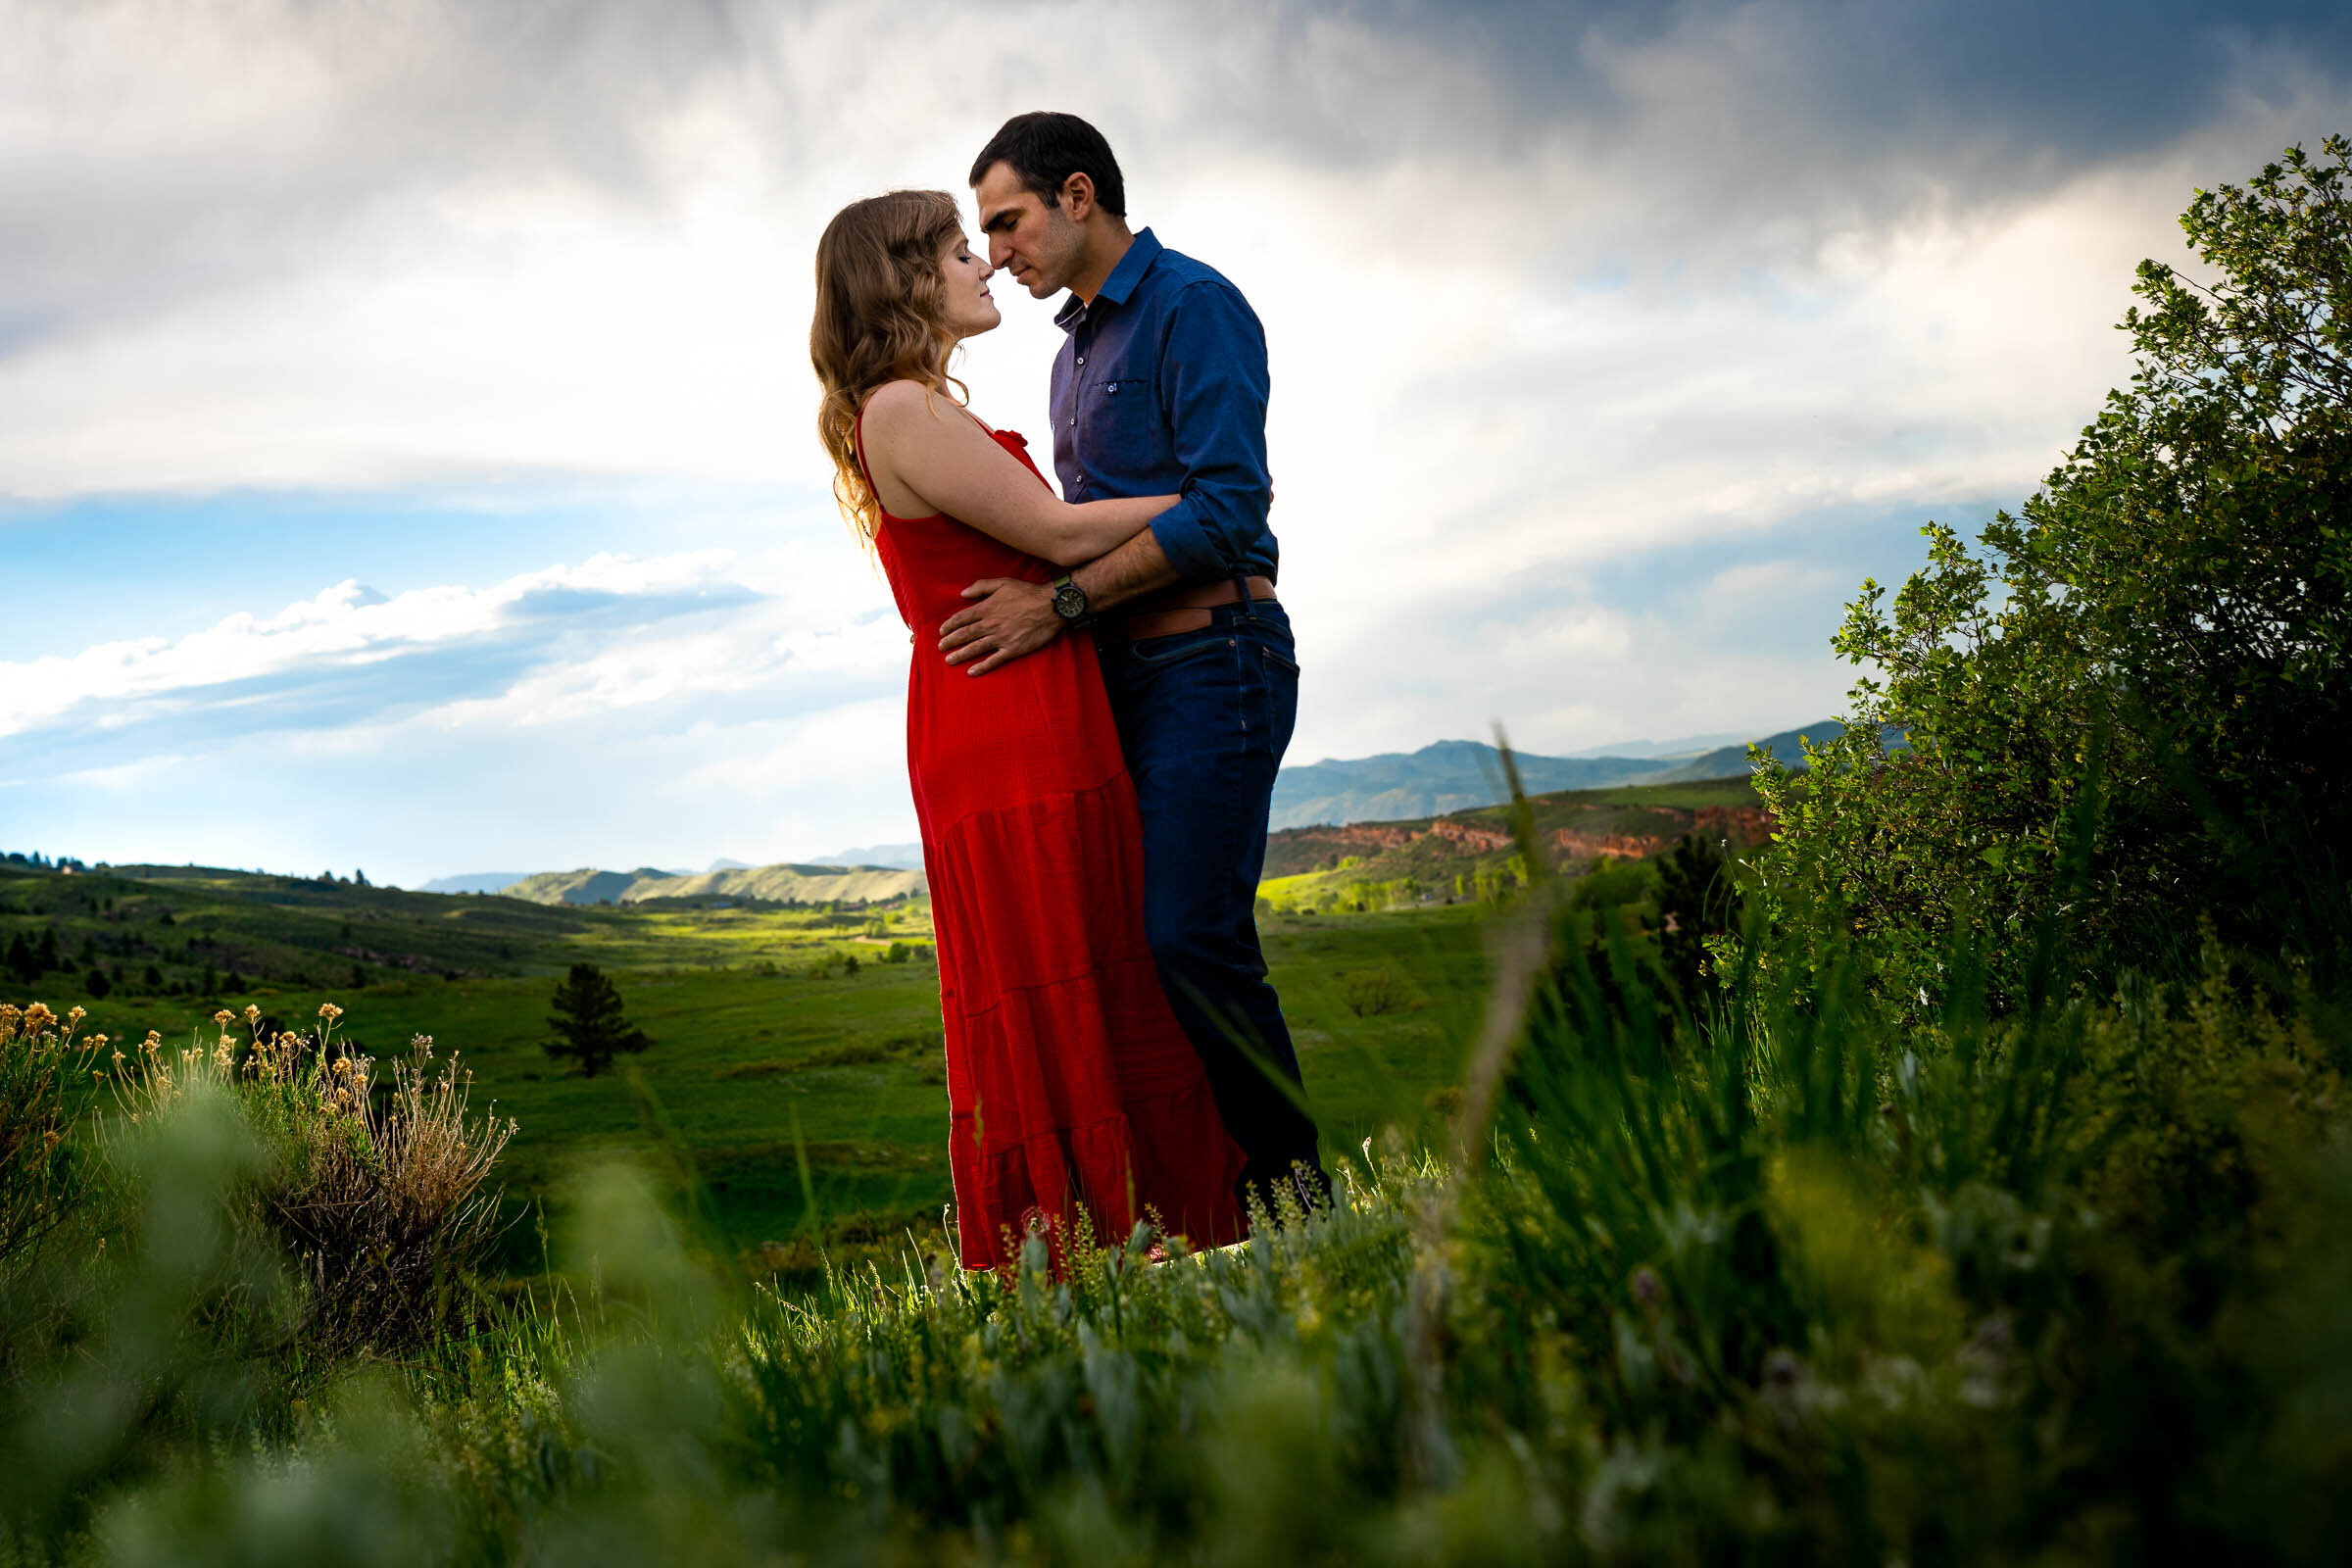 Engaged couple embraces in a luscious green landscape of rolling foothills during golden hour, Engagement Photos, Engagement Photo Inspiration, Engagement Photography, Engagement Photographer, Spring Engagement Photos, Fort Collins Engagement Photos, Fort Collins engagement photos, Fort Collins engagement photography, Fort Collins engagement photographer, Colorado engagement photos, Colorado engagement photography, Colorado engagement inspiration